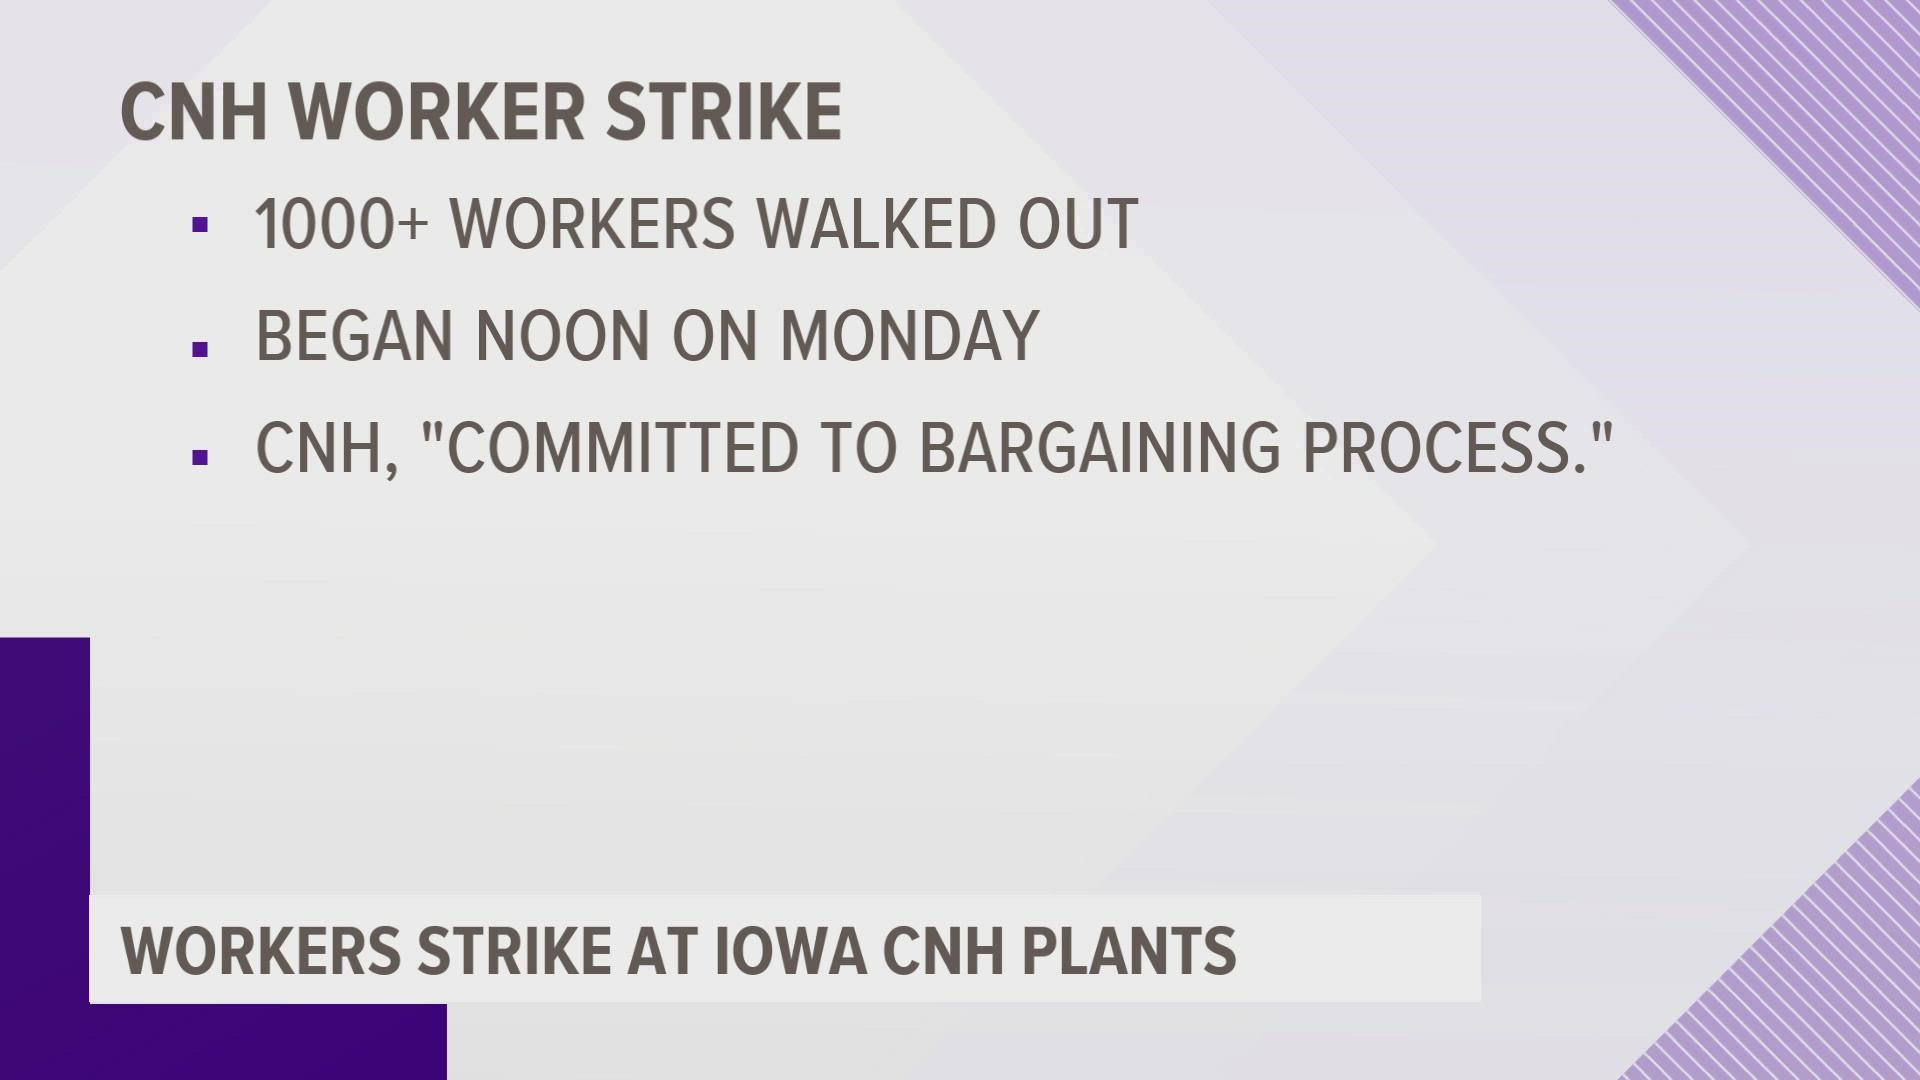 The workers went on strike to campaign for better treatment following their work to keep the Iowa and Wisconsin plants running during the pandemic.